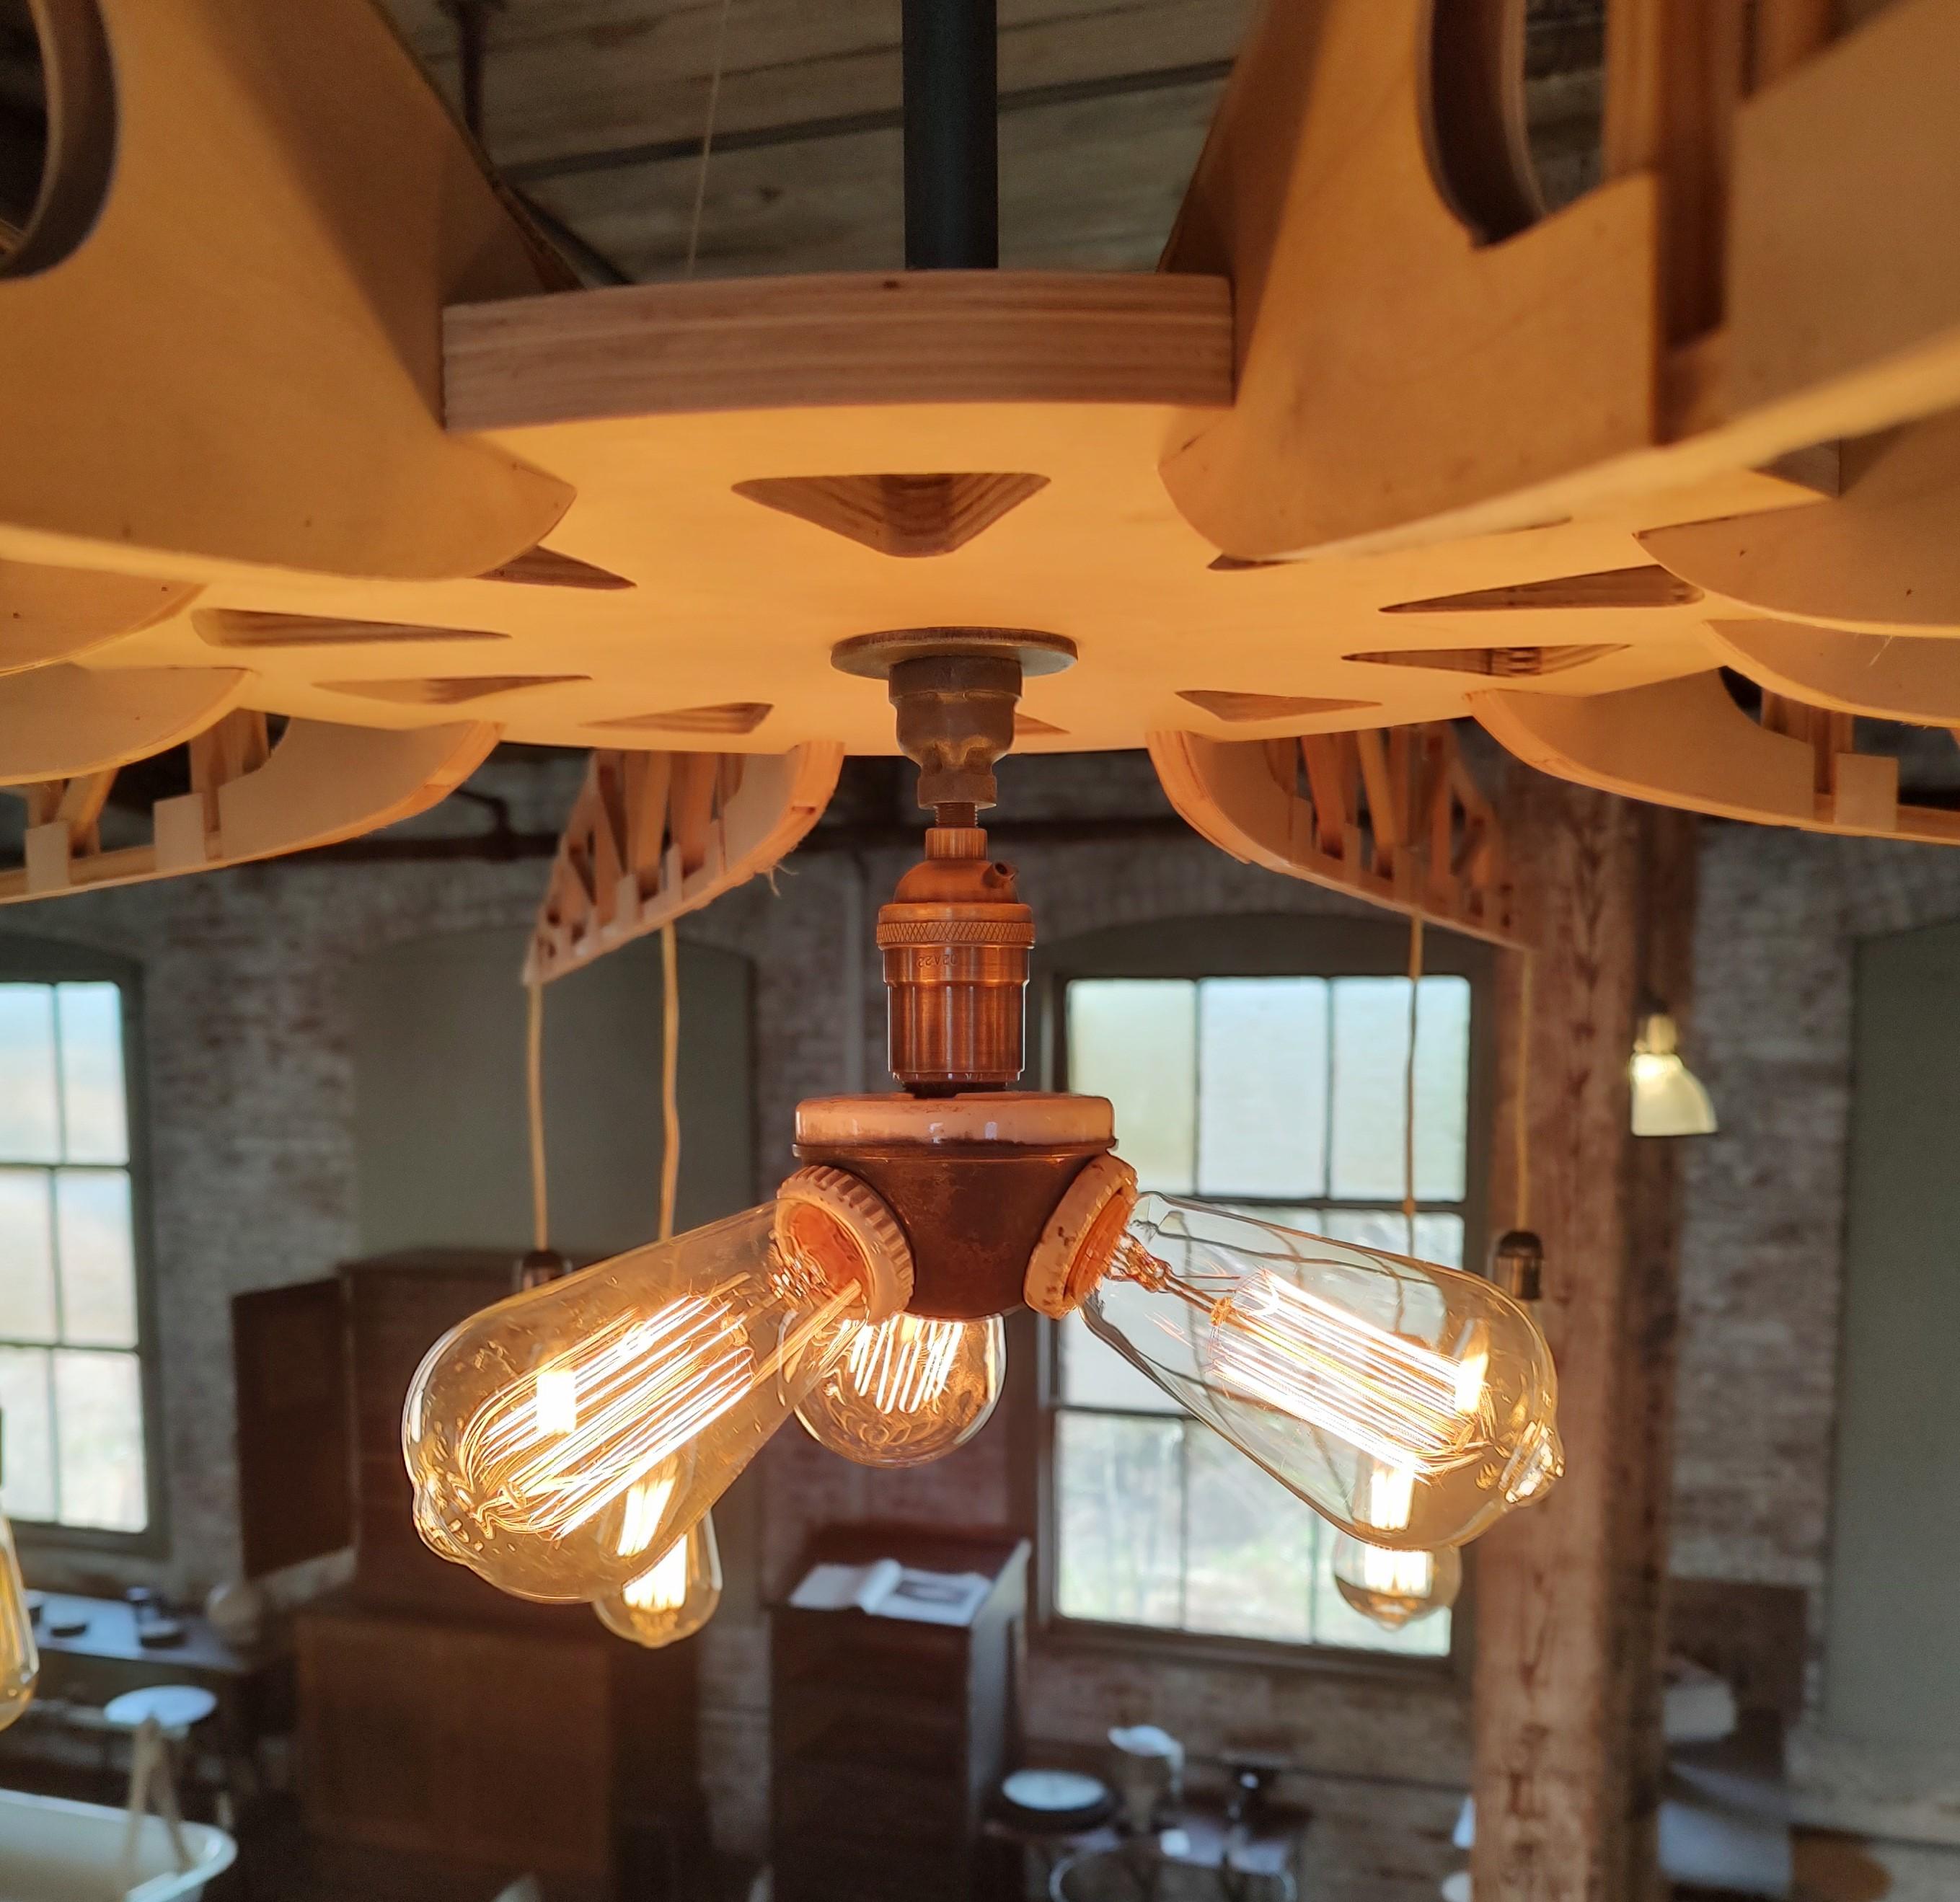 Metal Airplane Truss Chandelier For Sale